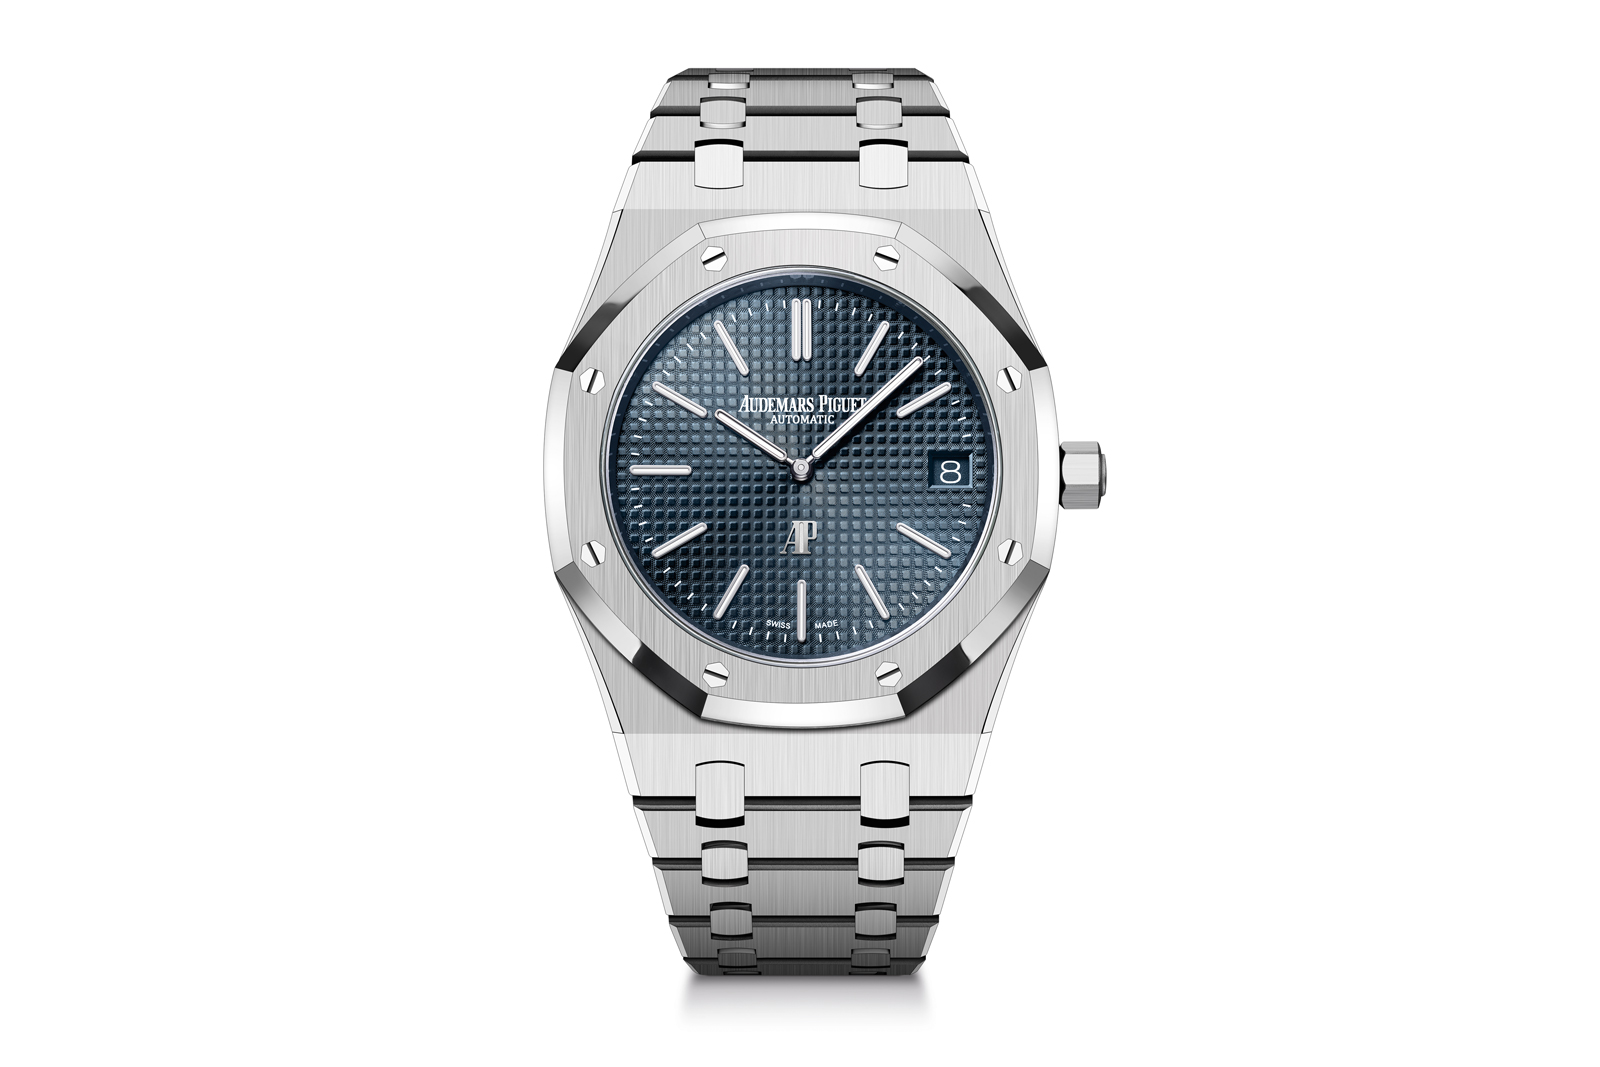 Recensione Audemars Piguet Introduces the Royal Oak “Jumbo” Extra-Thin Ref. 16202